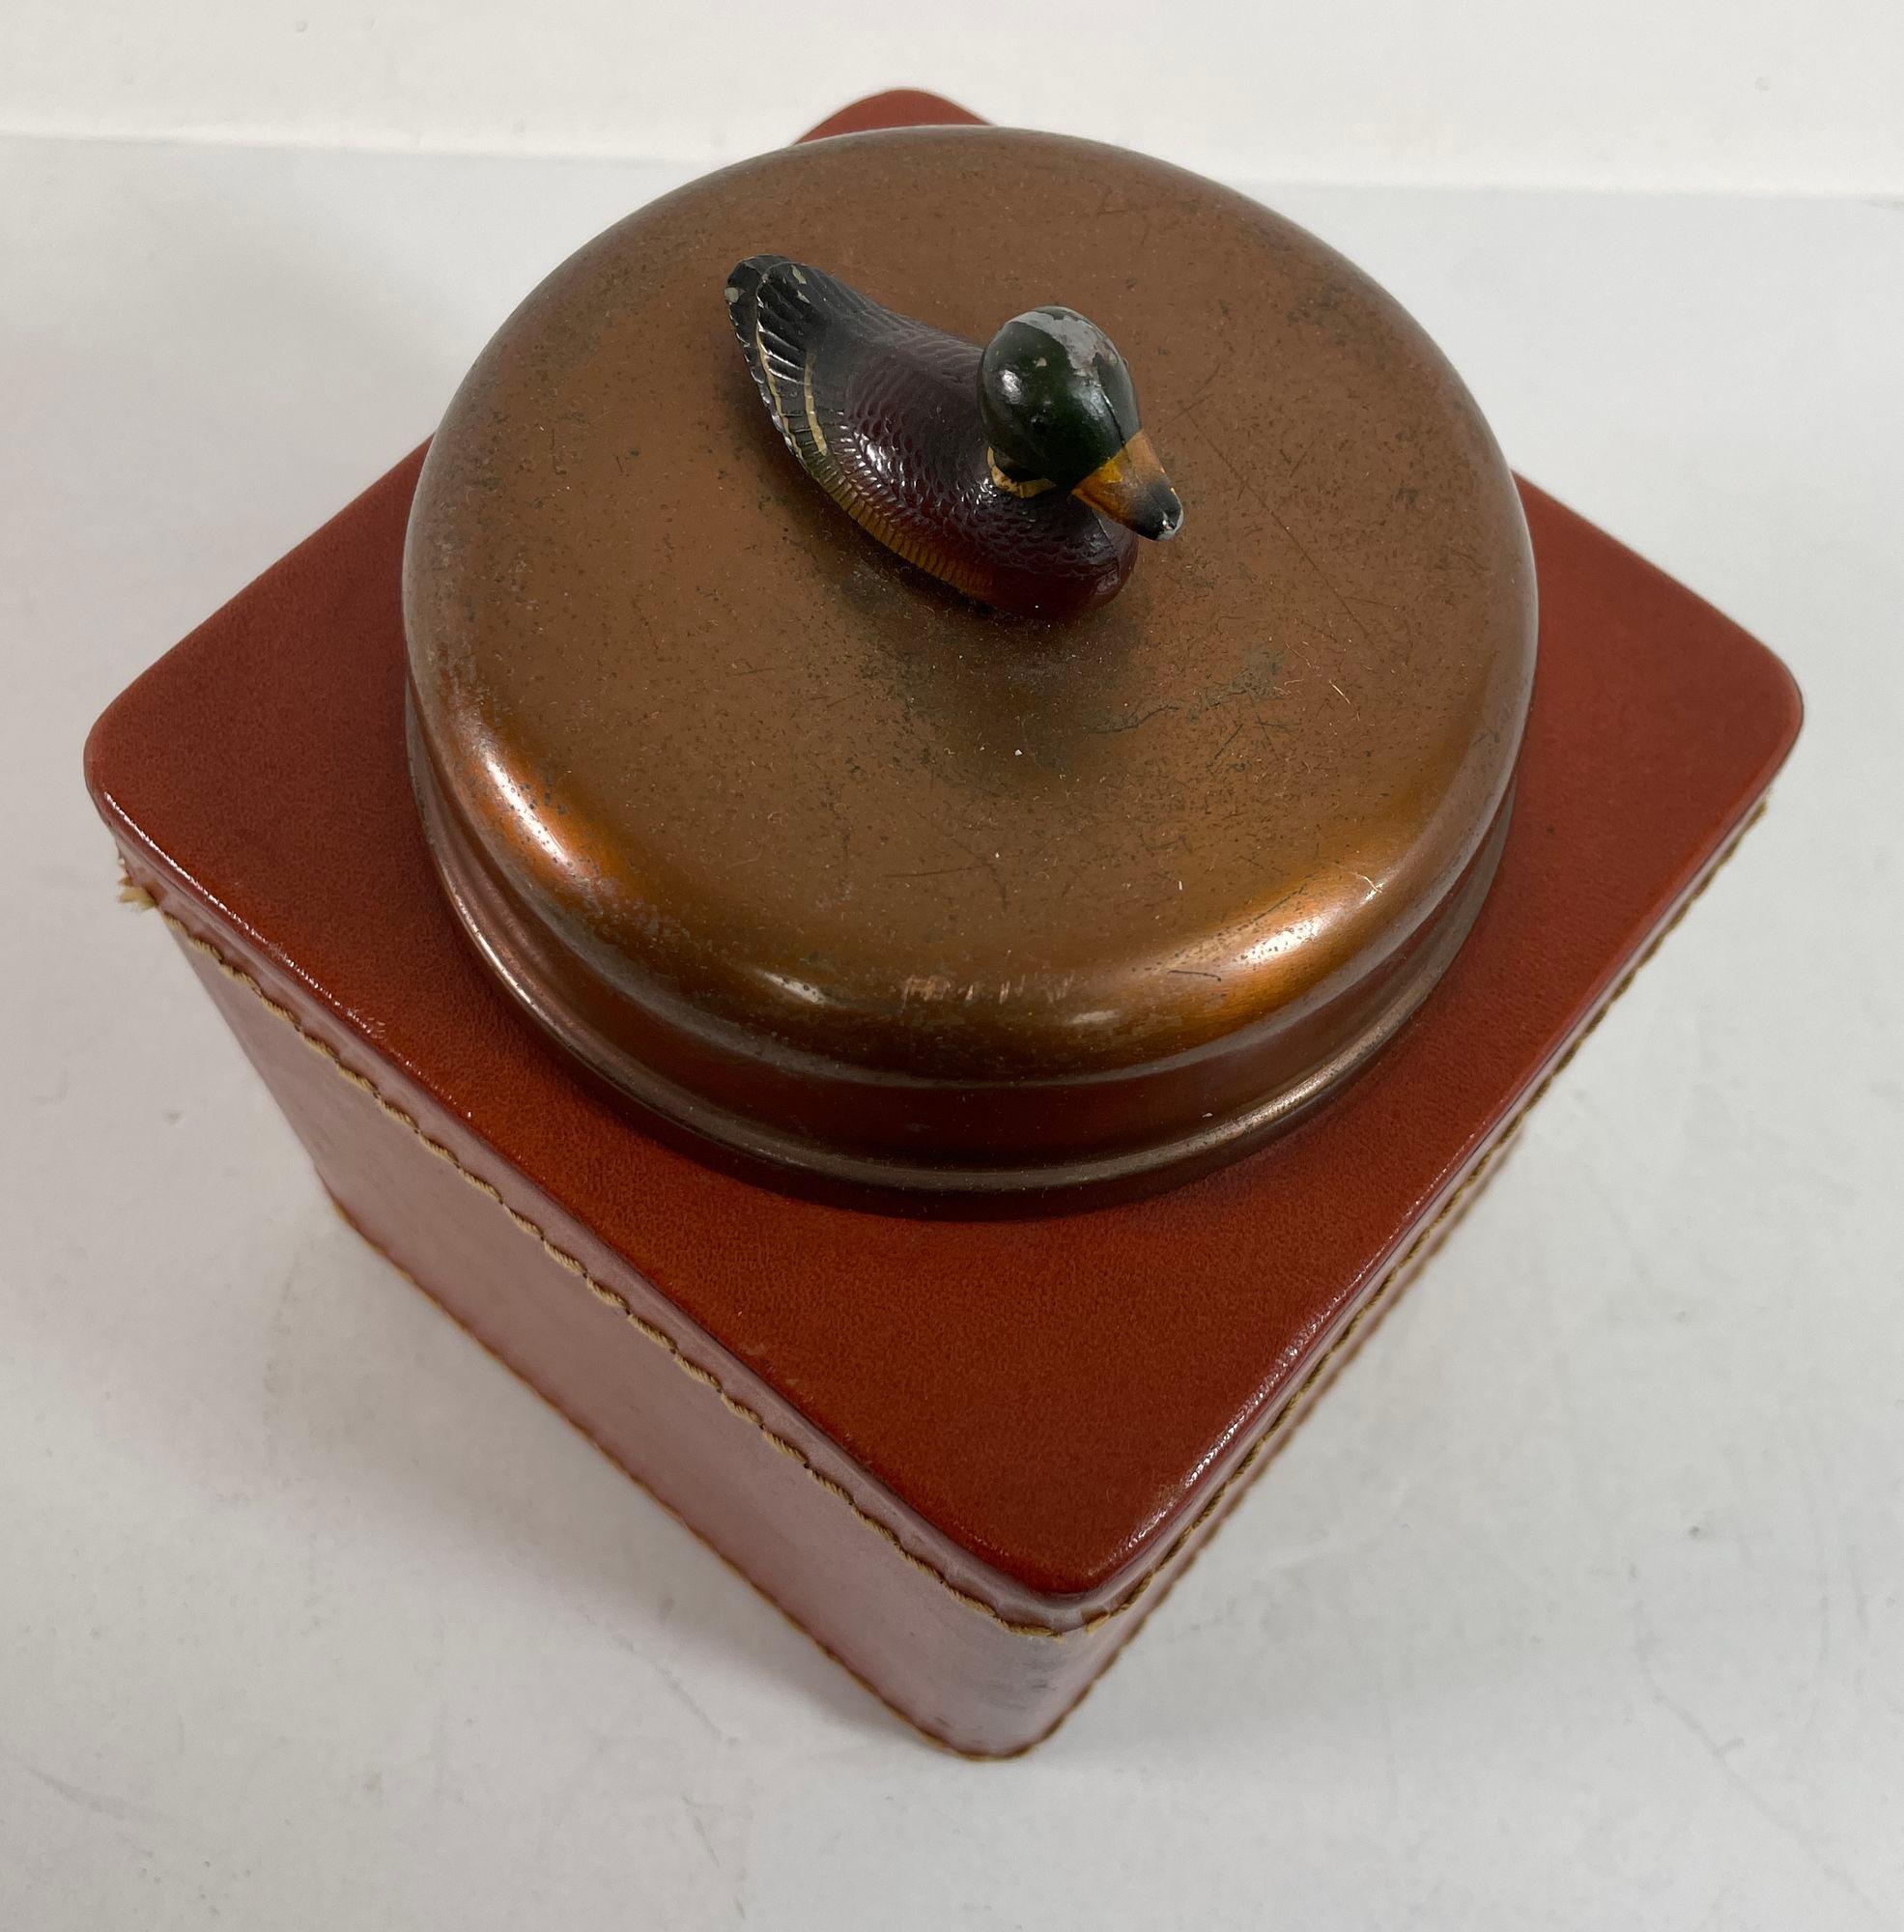 Vintage Traditional Mallard Duck Motif Leather Tobacco Humidor Jar.
Vintage tobacco humidor square box in cognac color leather wrapped.
Circa 1950s, made of copper metal, with a leather wrap sleeve and a metal top cover decorated with a finial in a